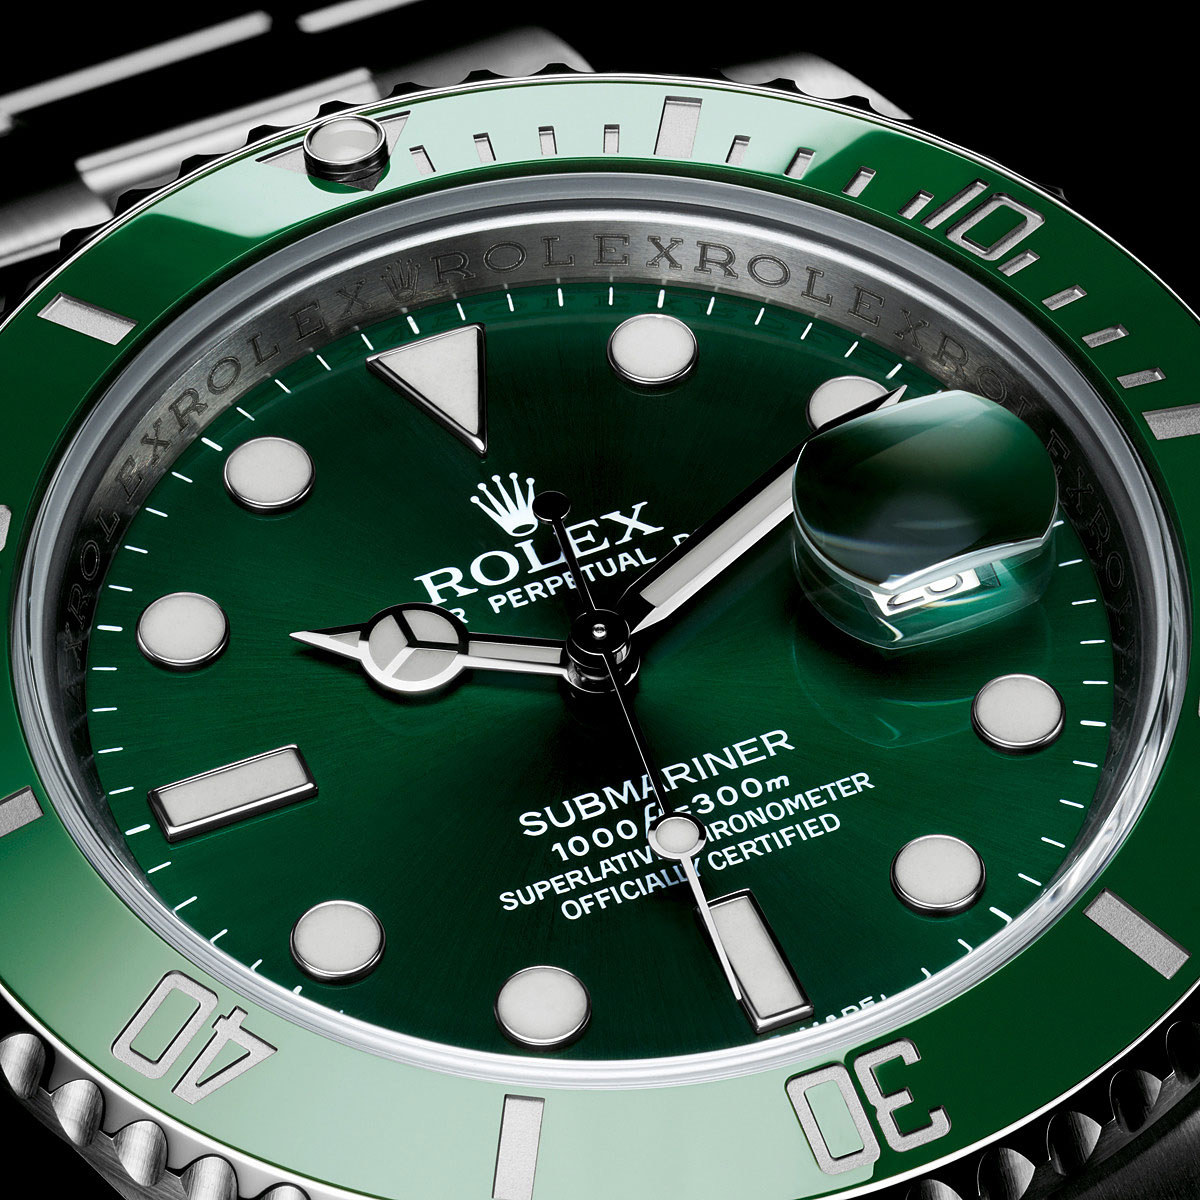 Welcome to RolexMagazine.comHome of Jake's Rolex World 